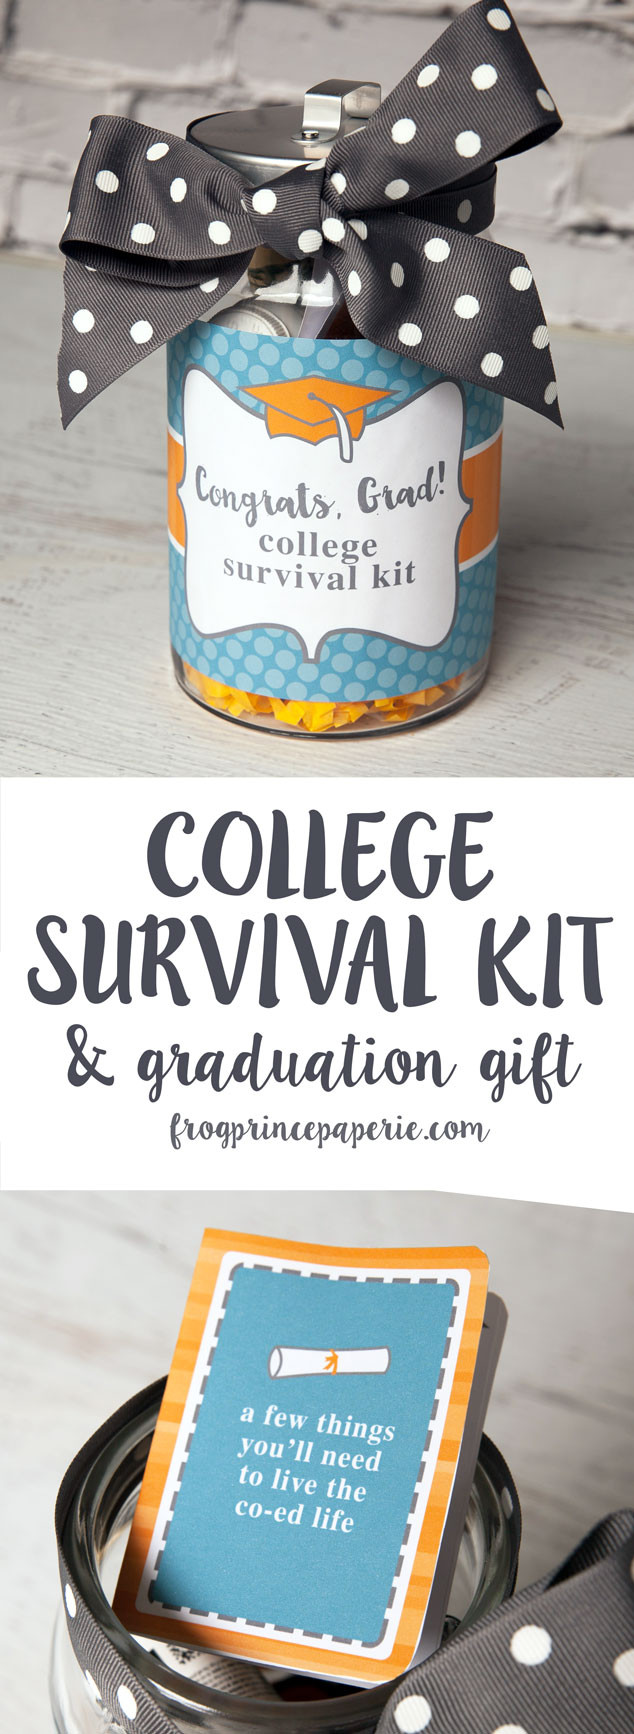 Ideas For A High School Graduation Gift
 College Survival Kit DIY Graduation Gift Frog Prince Paperie